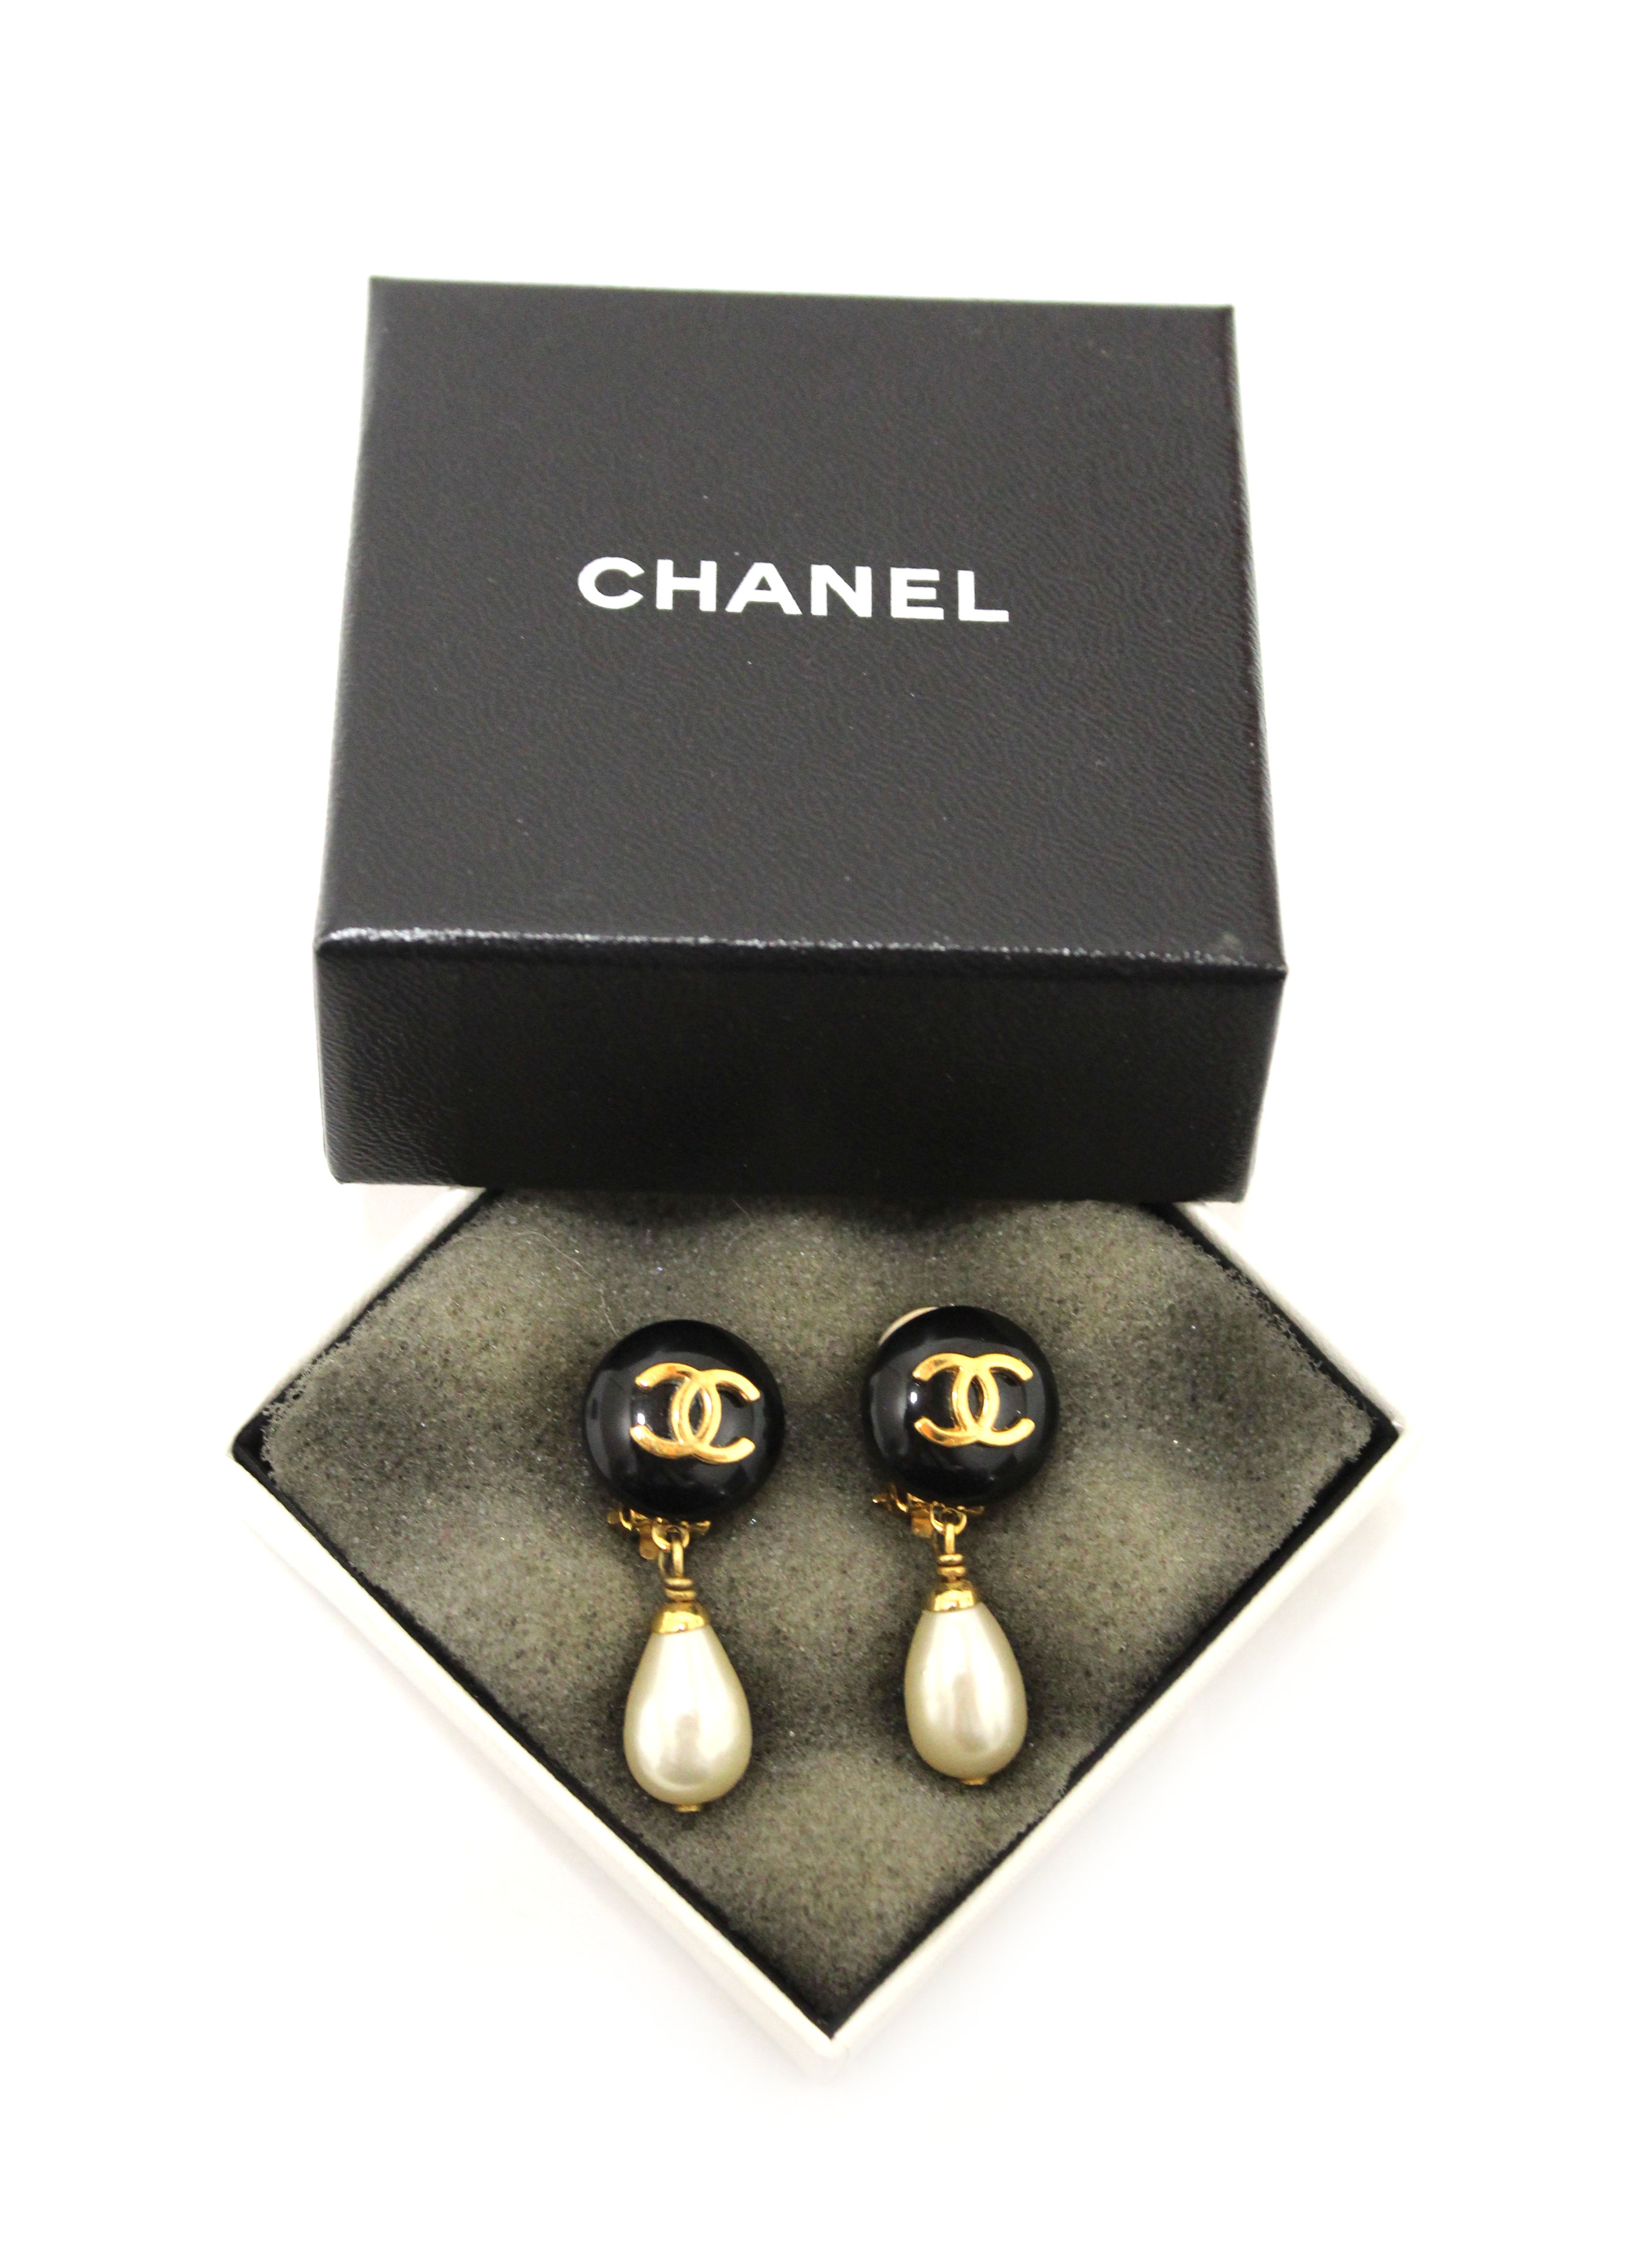 chanel earrings authentic pearl